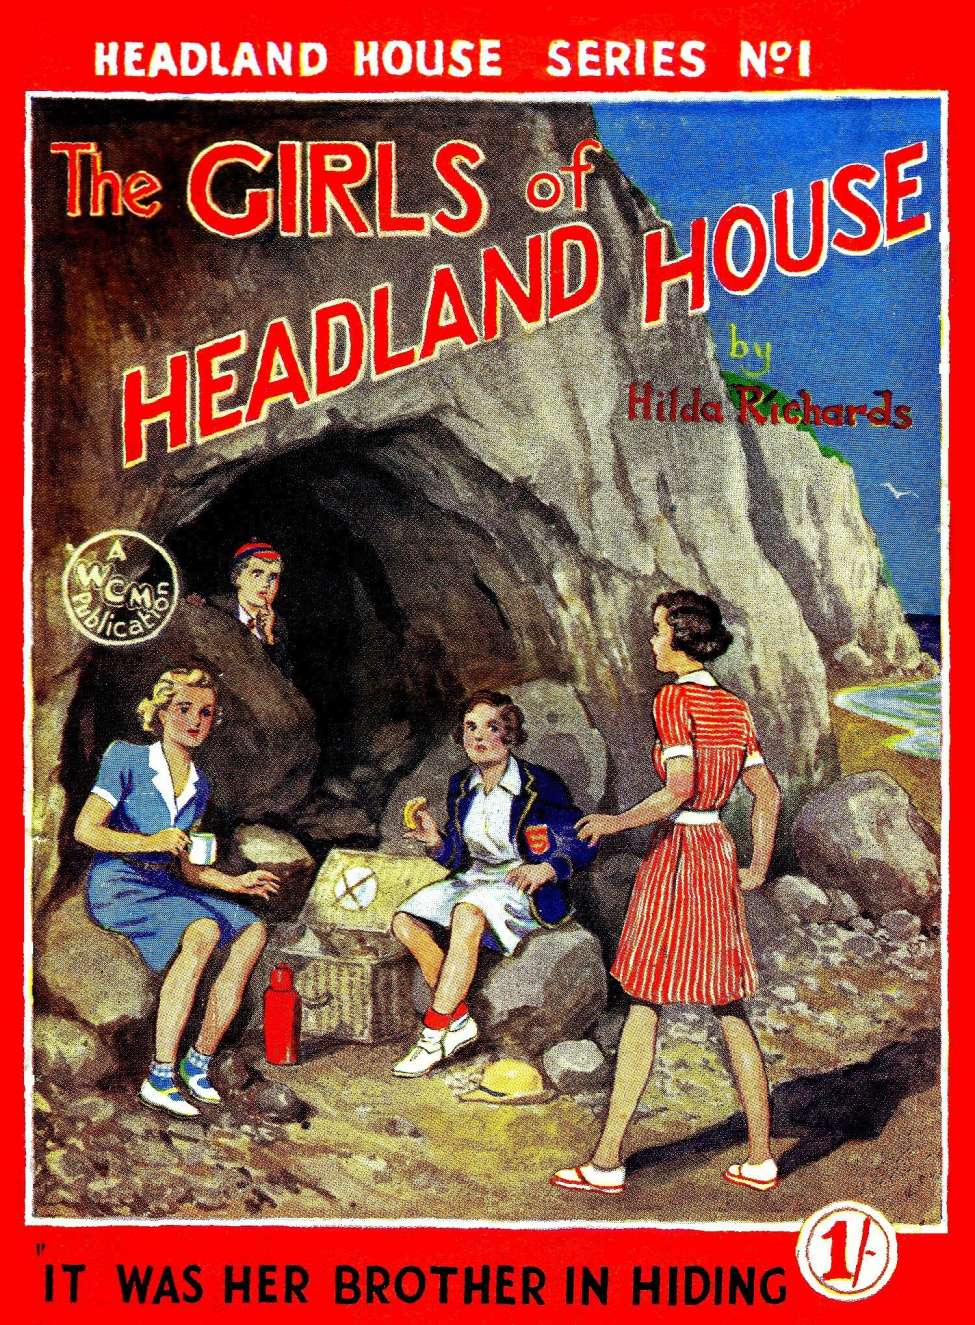 Comic Book Cover For The Girls of Headland House 1 - It was her Brother in Hiding